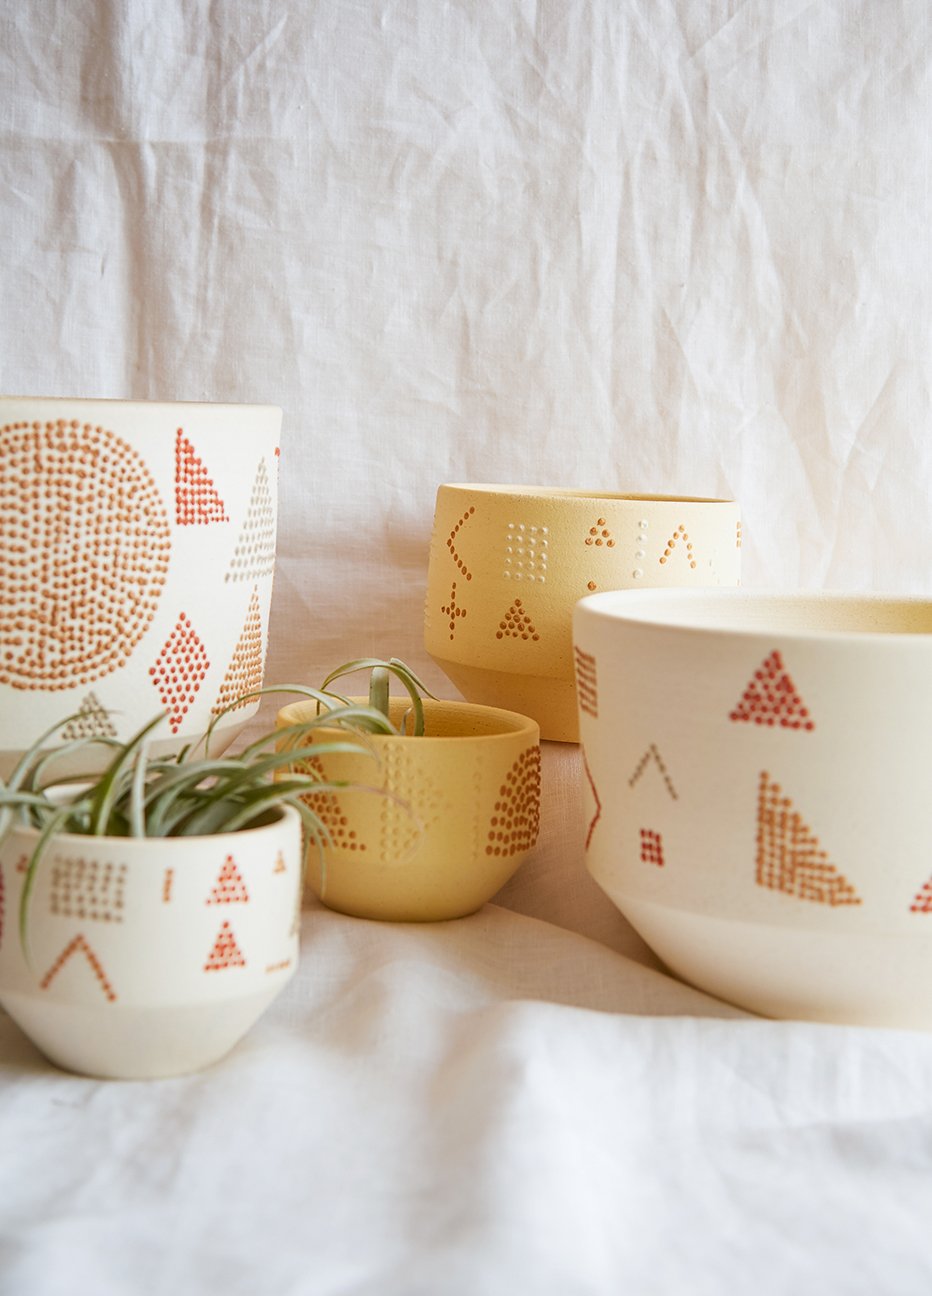 Heidi Anderson Pots have handpainted geometric motifs inspired by California.